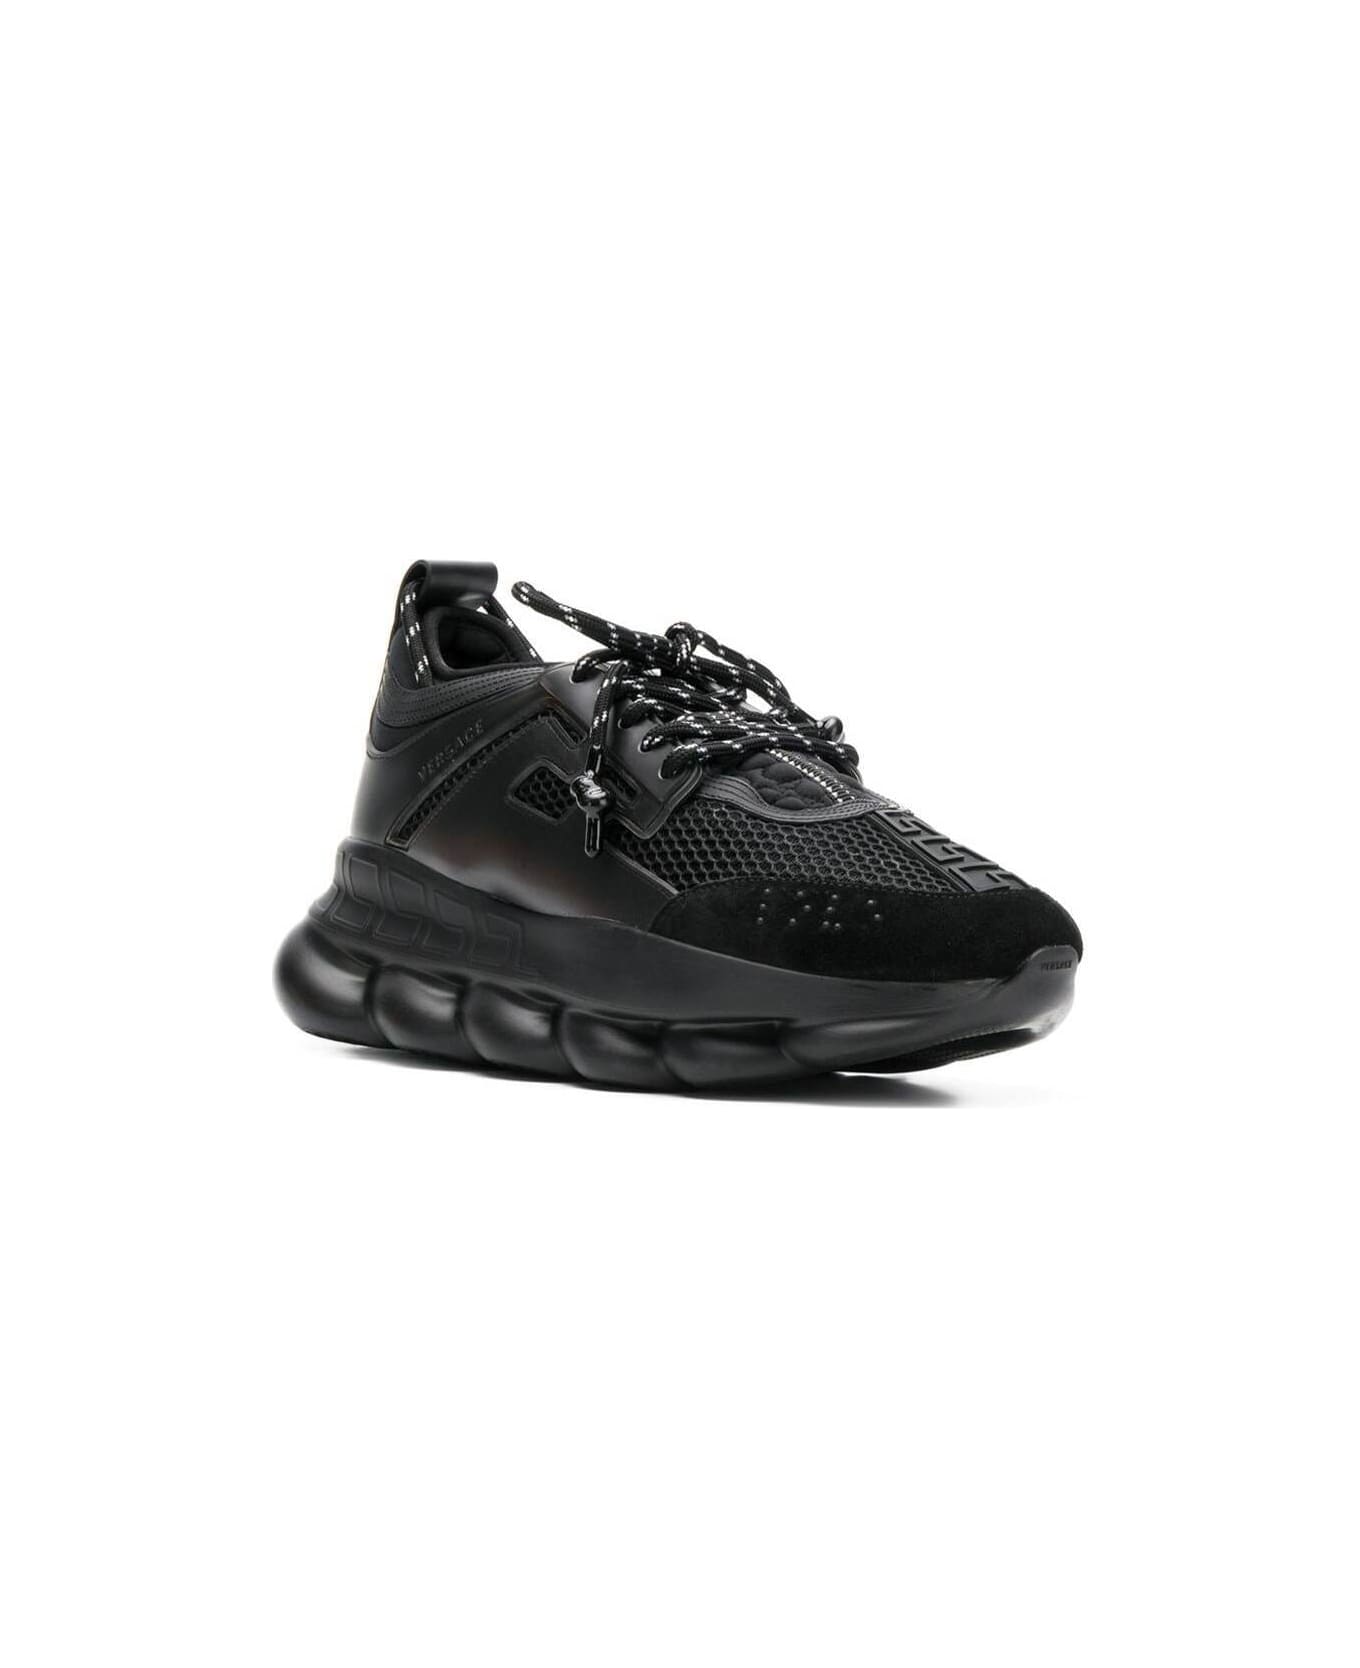 Versace Black Mesh And Leather Chain Reaction Sneakers  Versace Man - Black